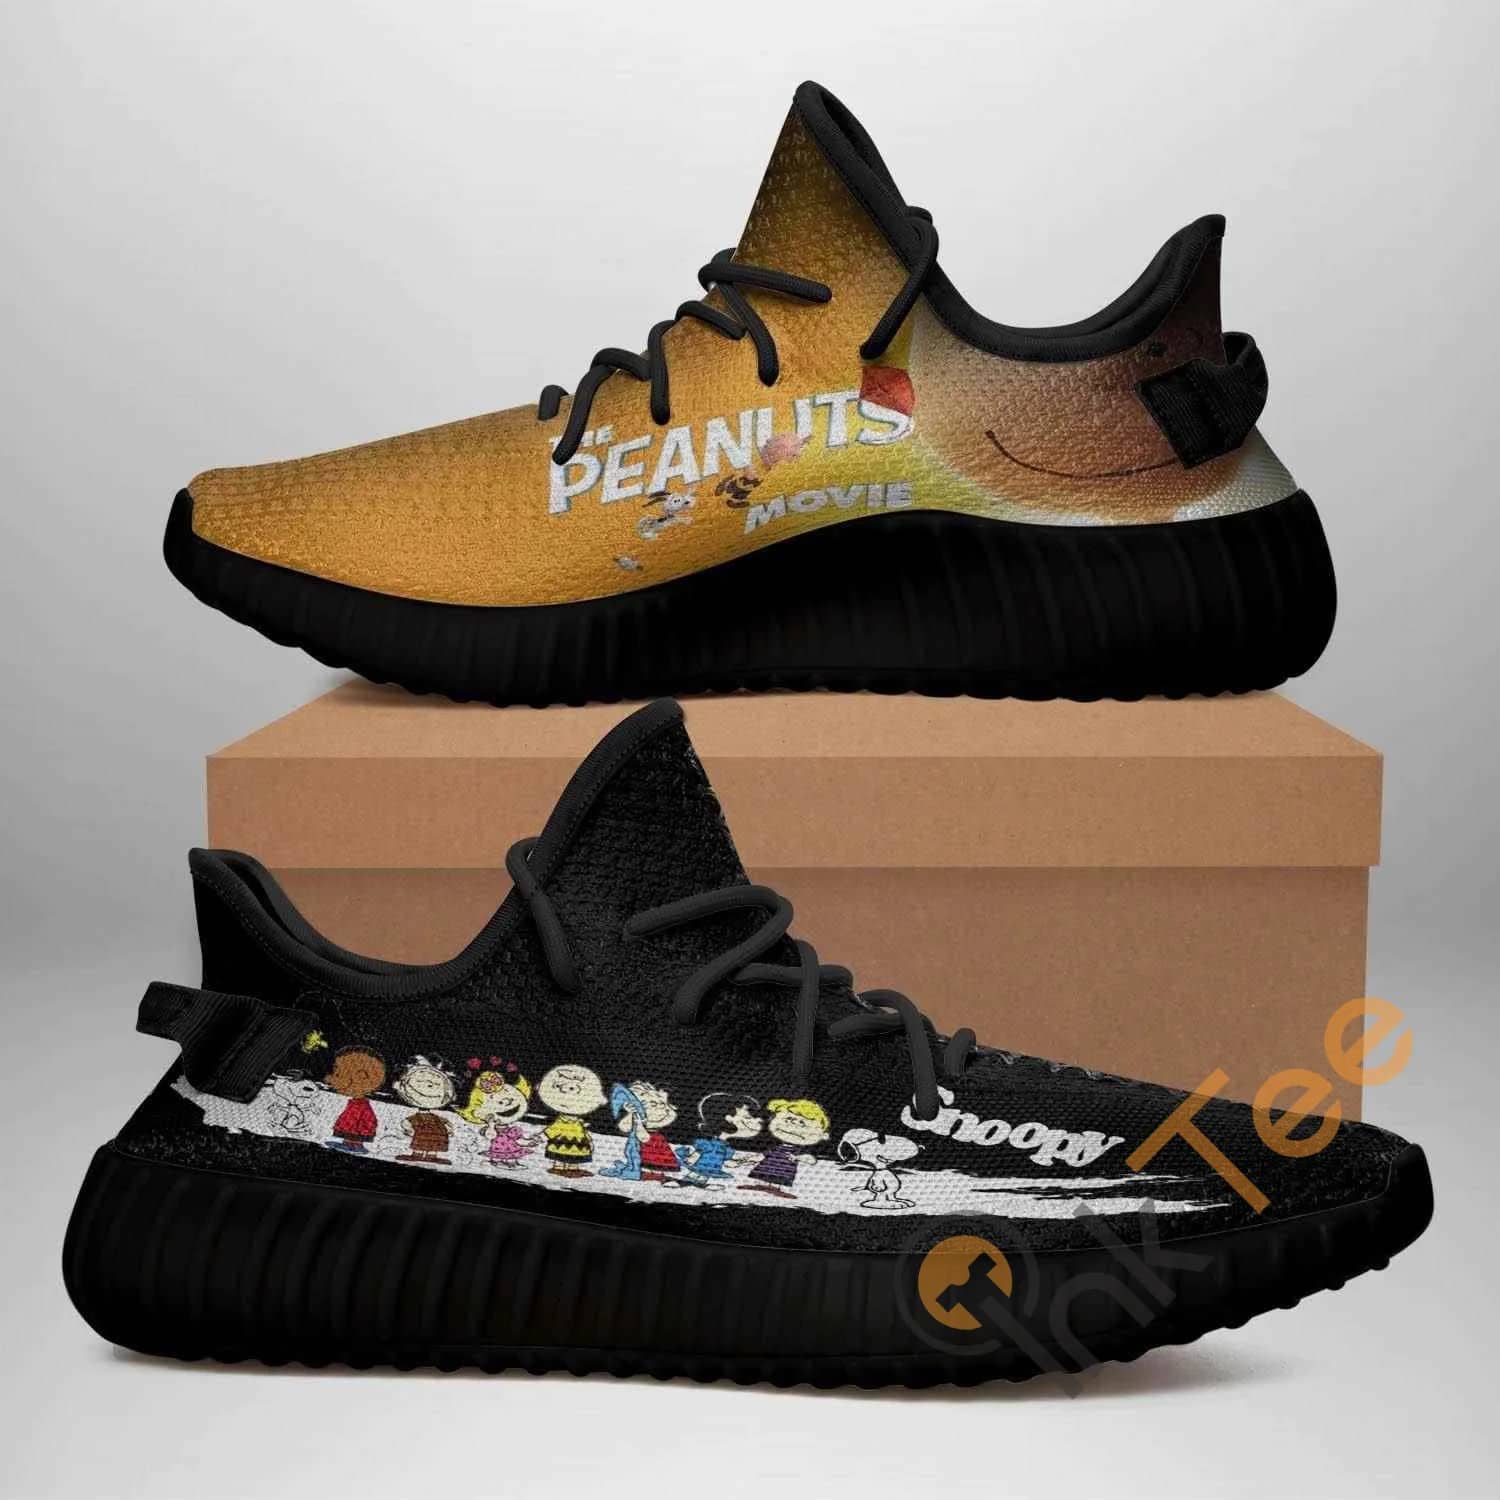 The Peanuts Black Edition Amazon Best Selling Yeezy Boost